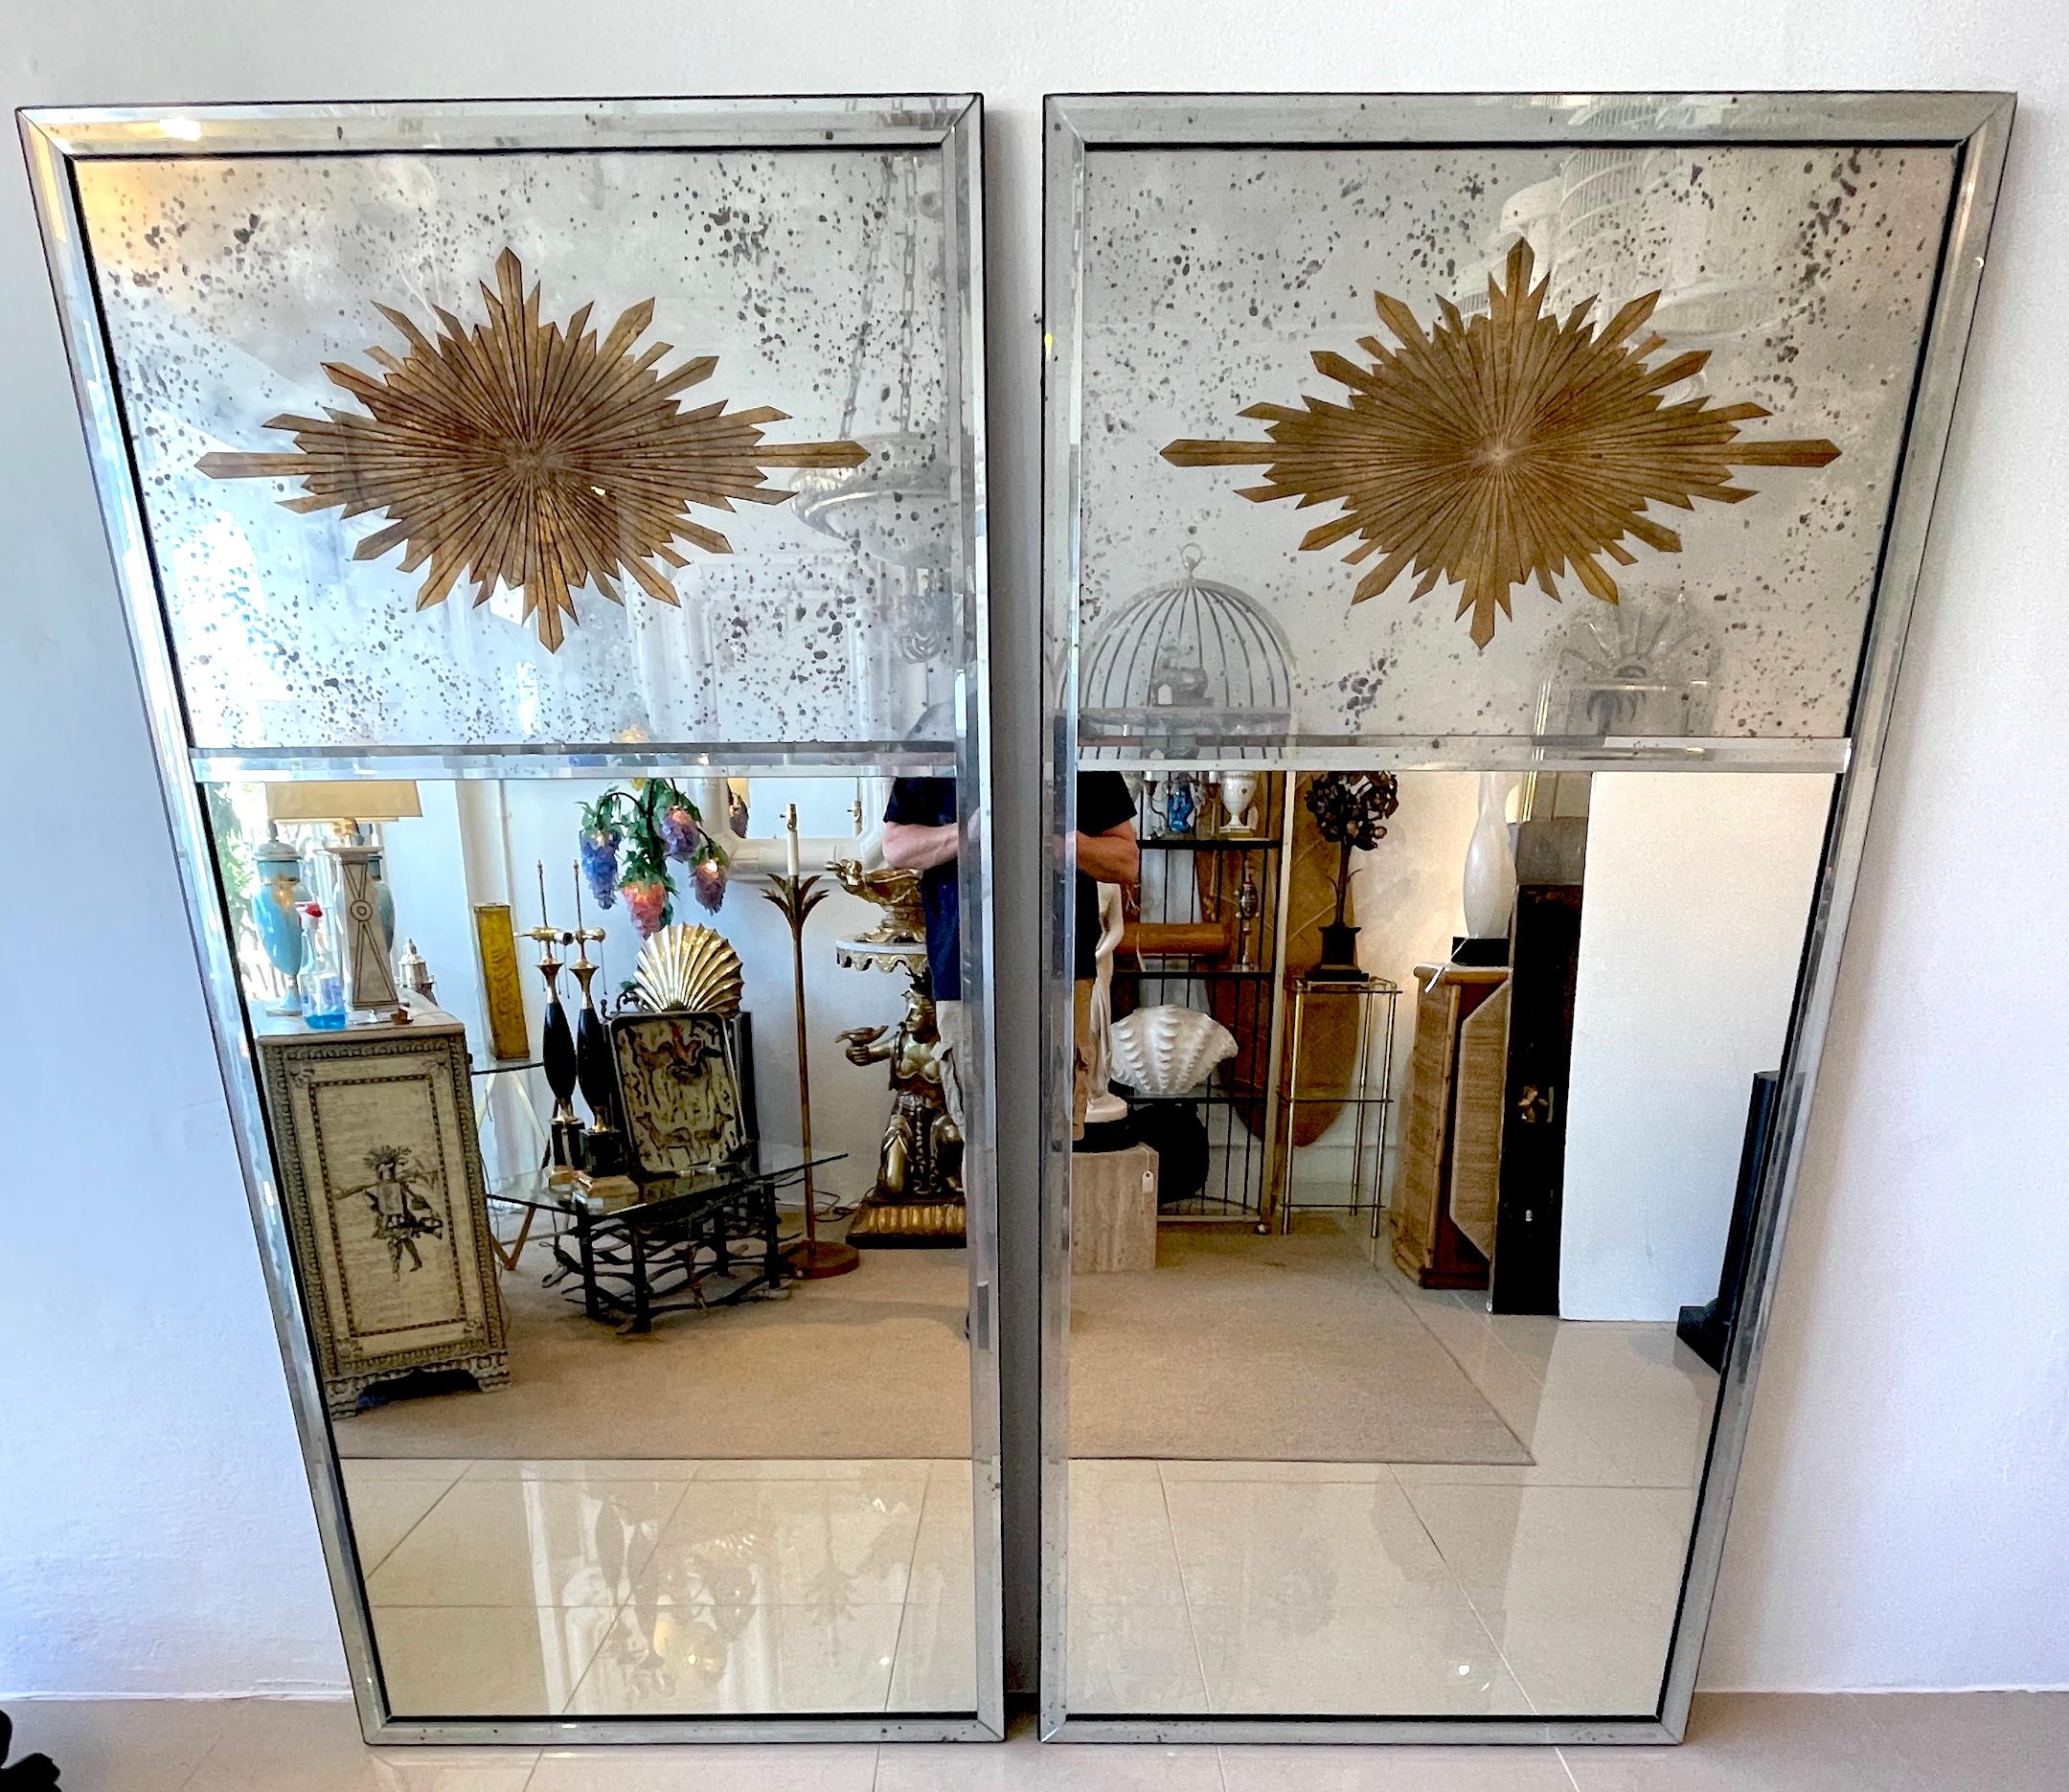 Pair of Maison Jansen style Eglomise Sunburst Medallion Trumeau mirrors
We are pleased to offer a stunning pair of Tall Neoclassical Mirrors. Each one with upper section with an elongated eglomise gilt sunburst, (21.5-Inches high x 34.5 inches